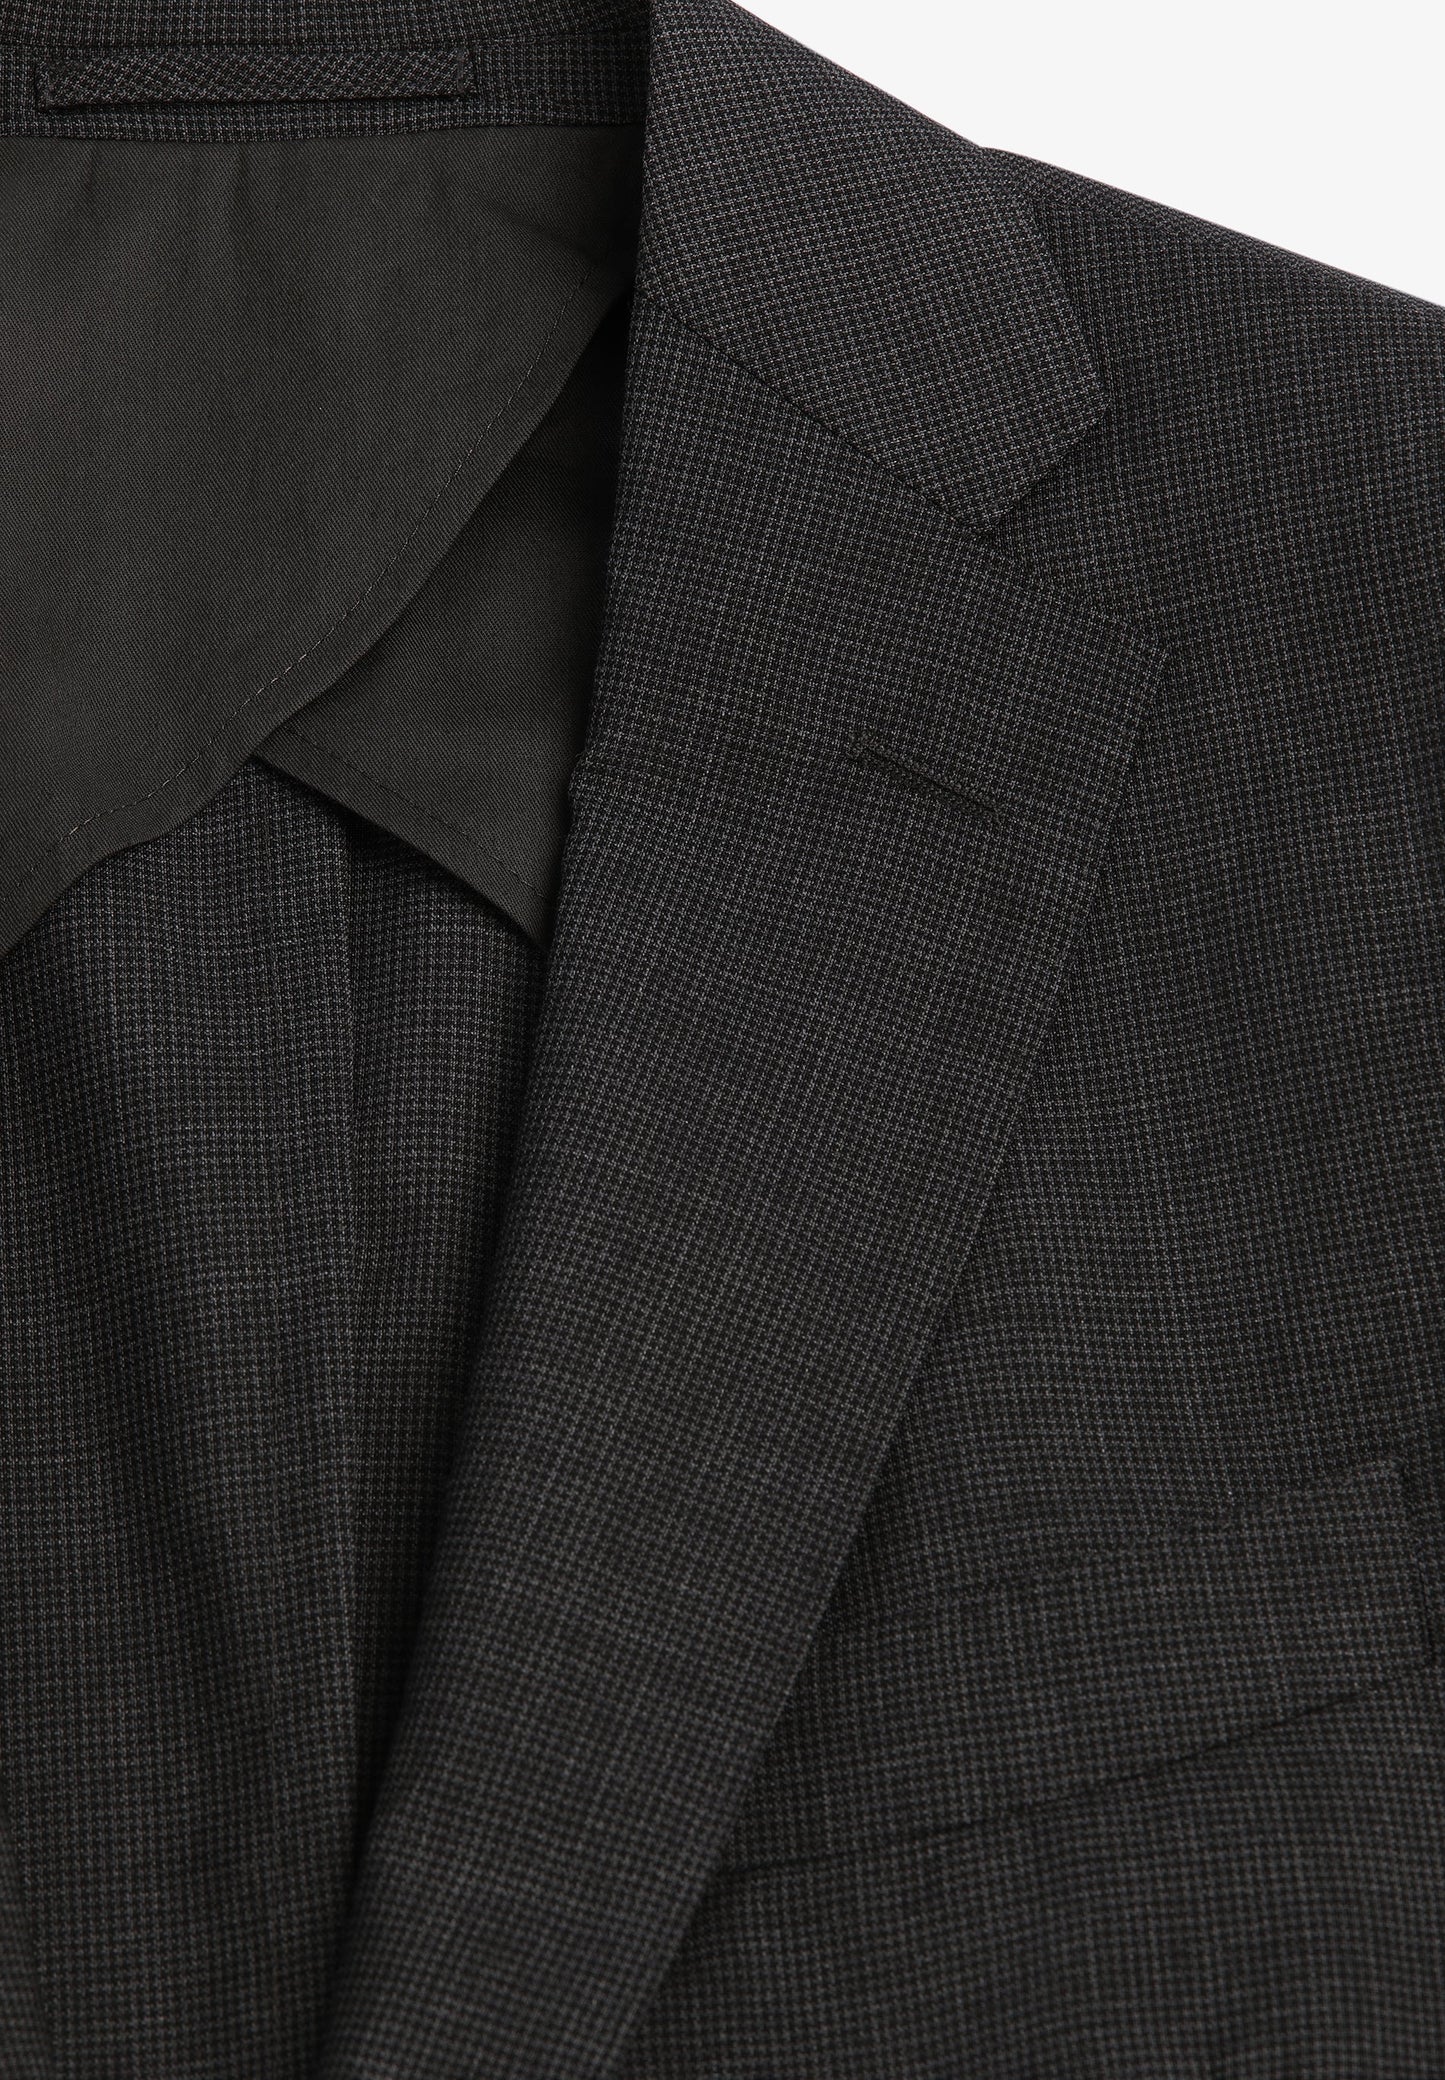 CLASSIC GREY WOOL SUIT